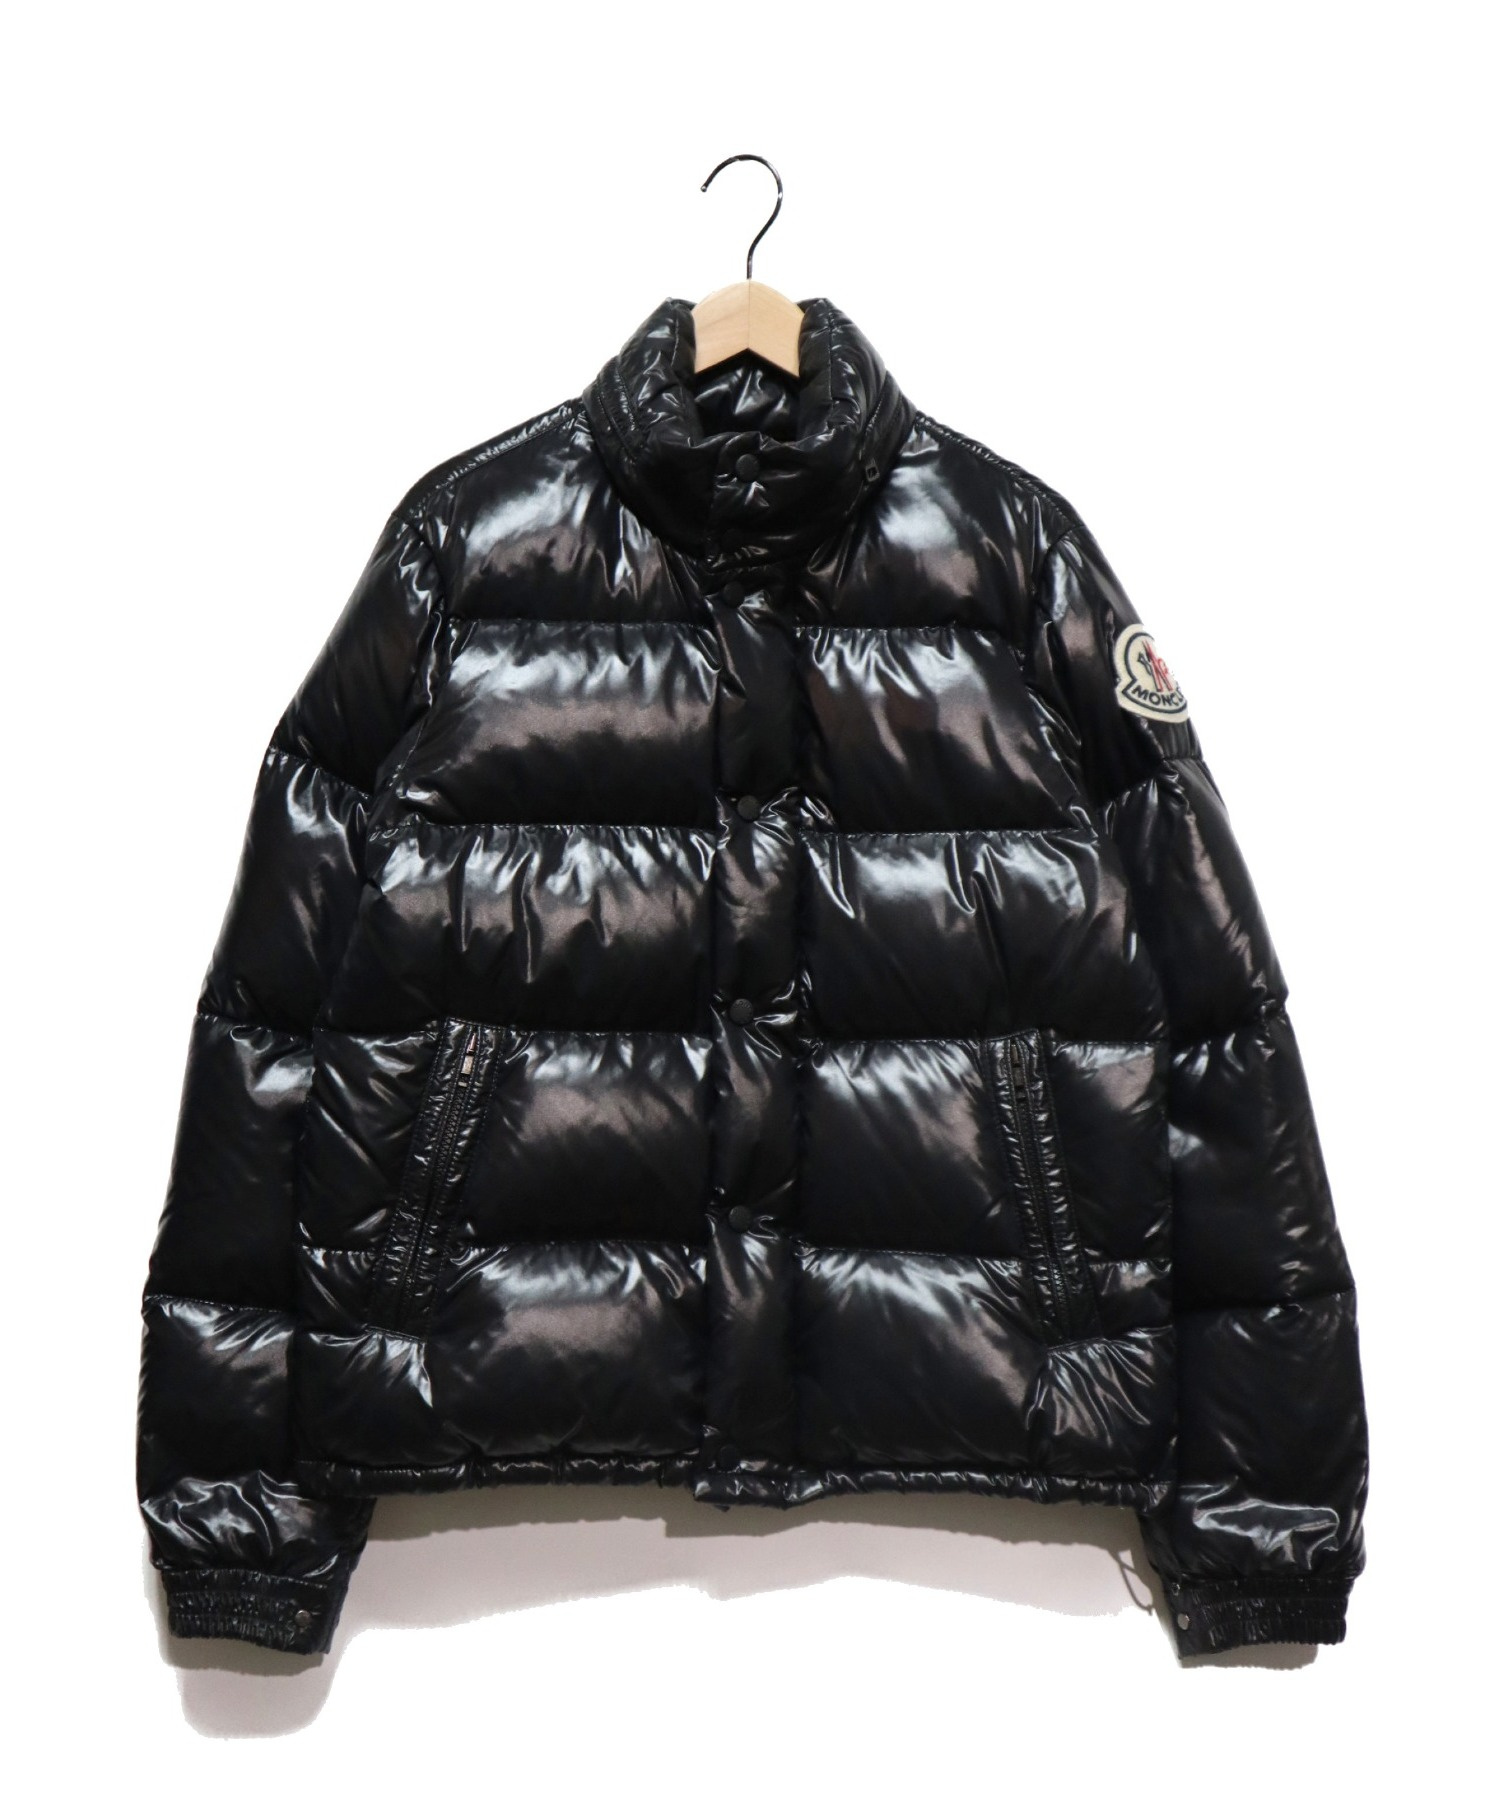 MONCLER - MONCLER EVEREST モンクレール エベレスト ダウン